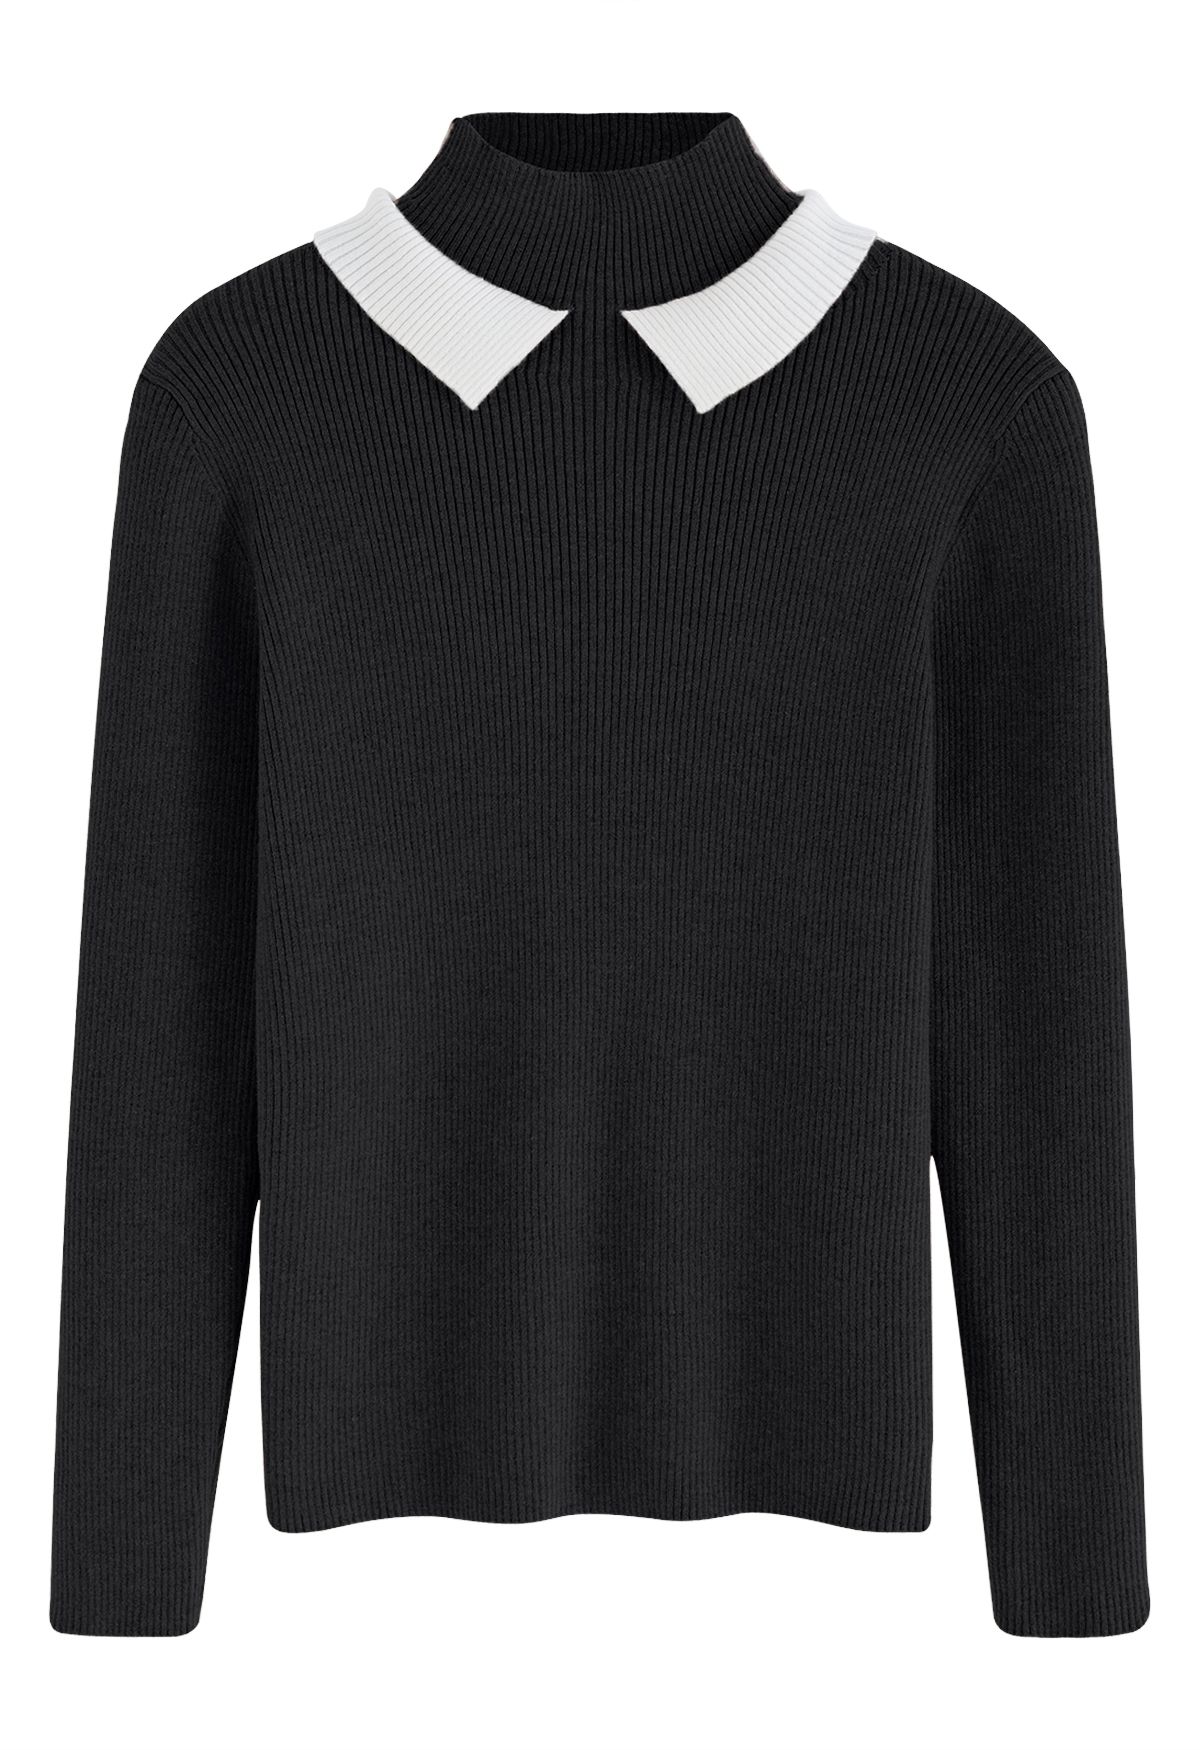 Contrast Doll Collar Mock Neck Knit Top in Black